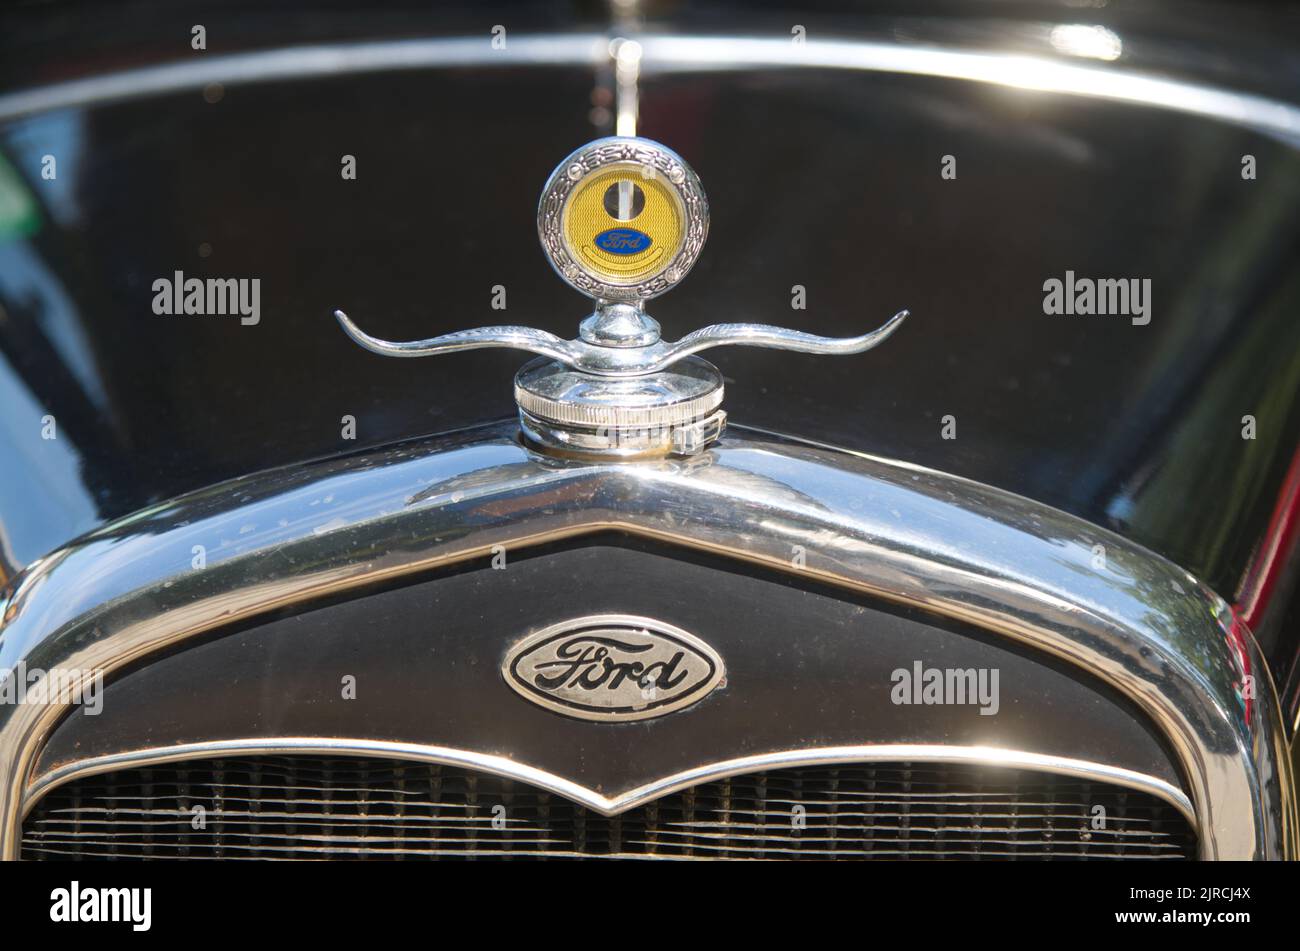 A Ford Emblem and temperature gauge on an antique Ford in an auto parade in Dennis, Massachusetts, Cape Cod, USA Stock Photo